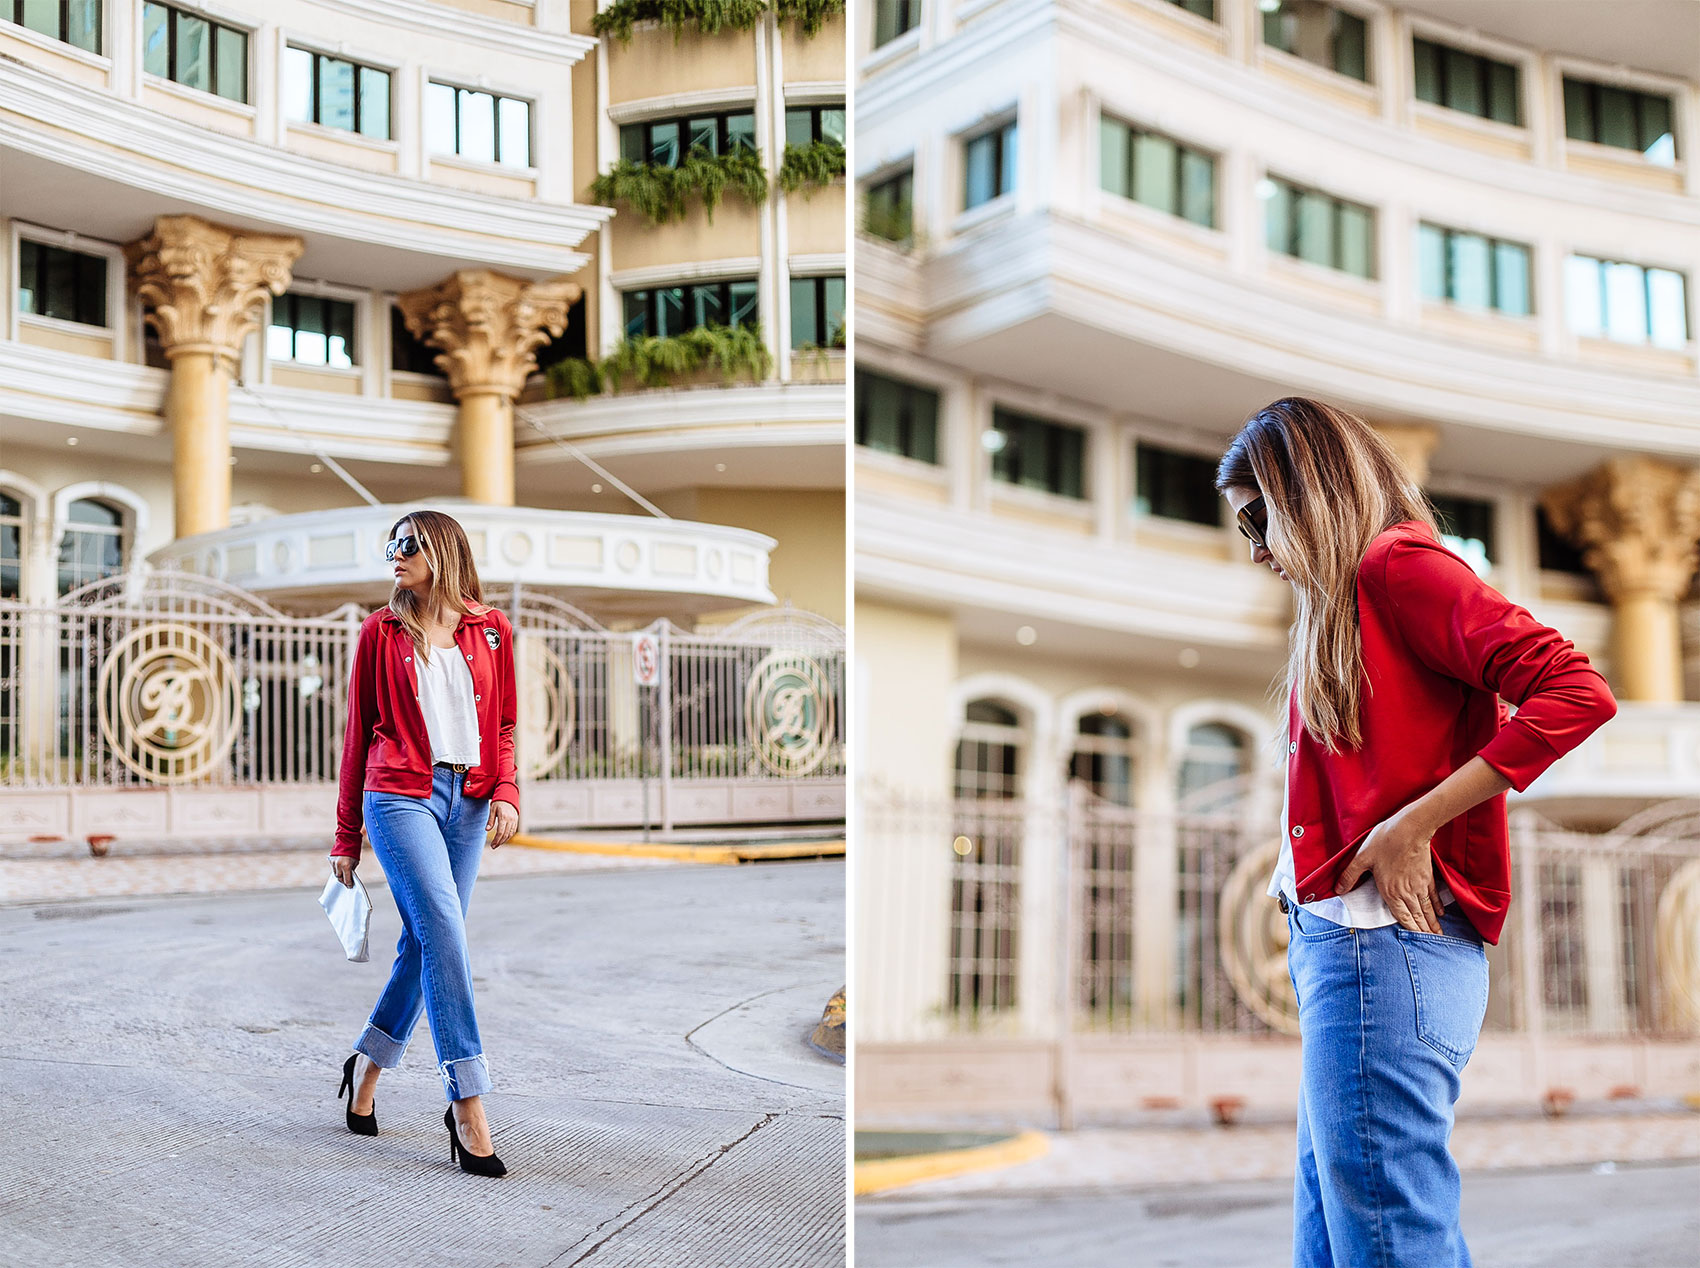 Maristella wearing a Gucci style satin red jacket with denim and black pumps